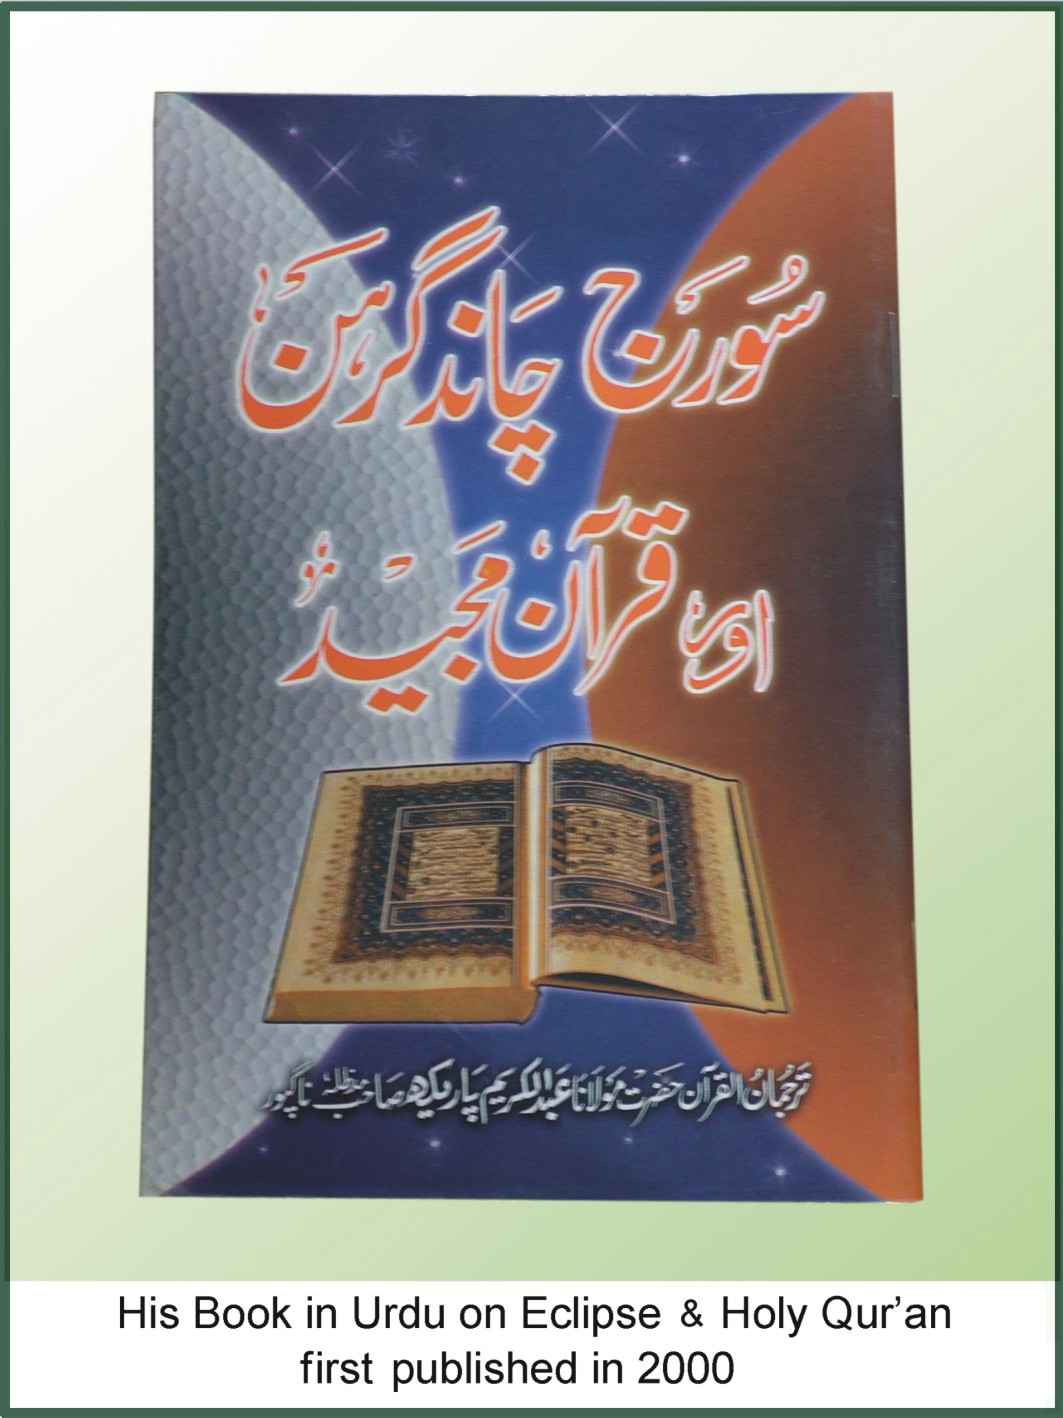 Eclipse & The Holy Qur'an (Urdu) First Published in 2000